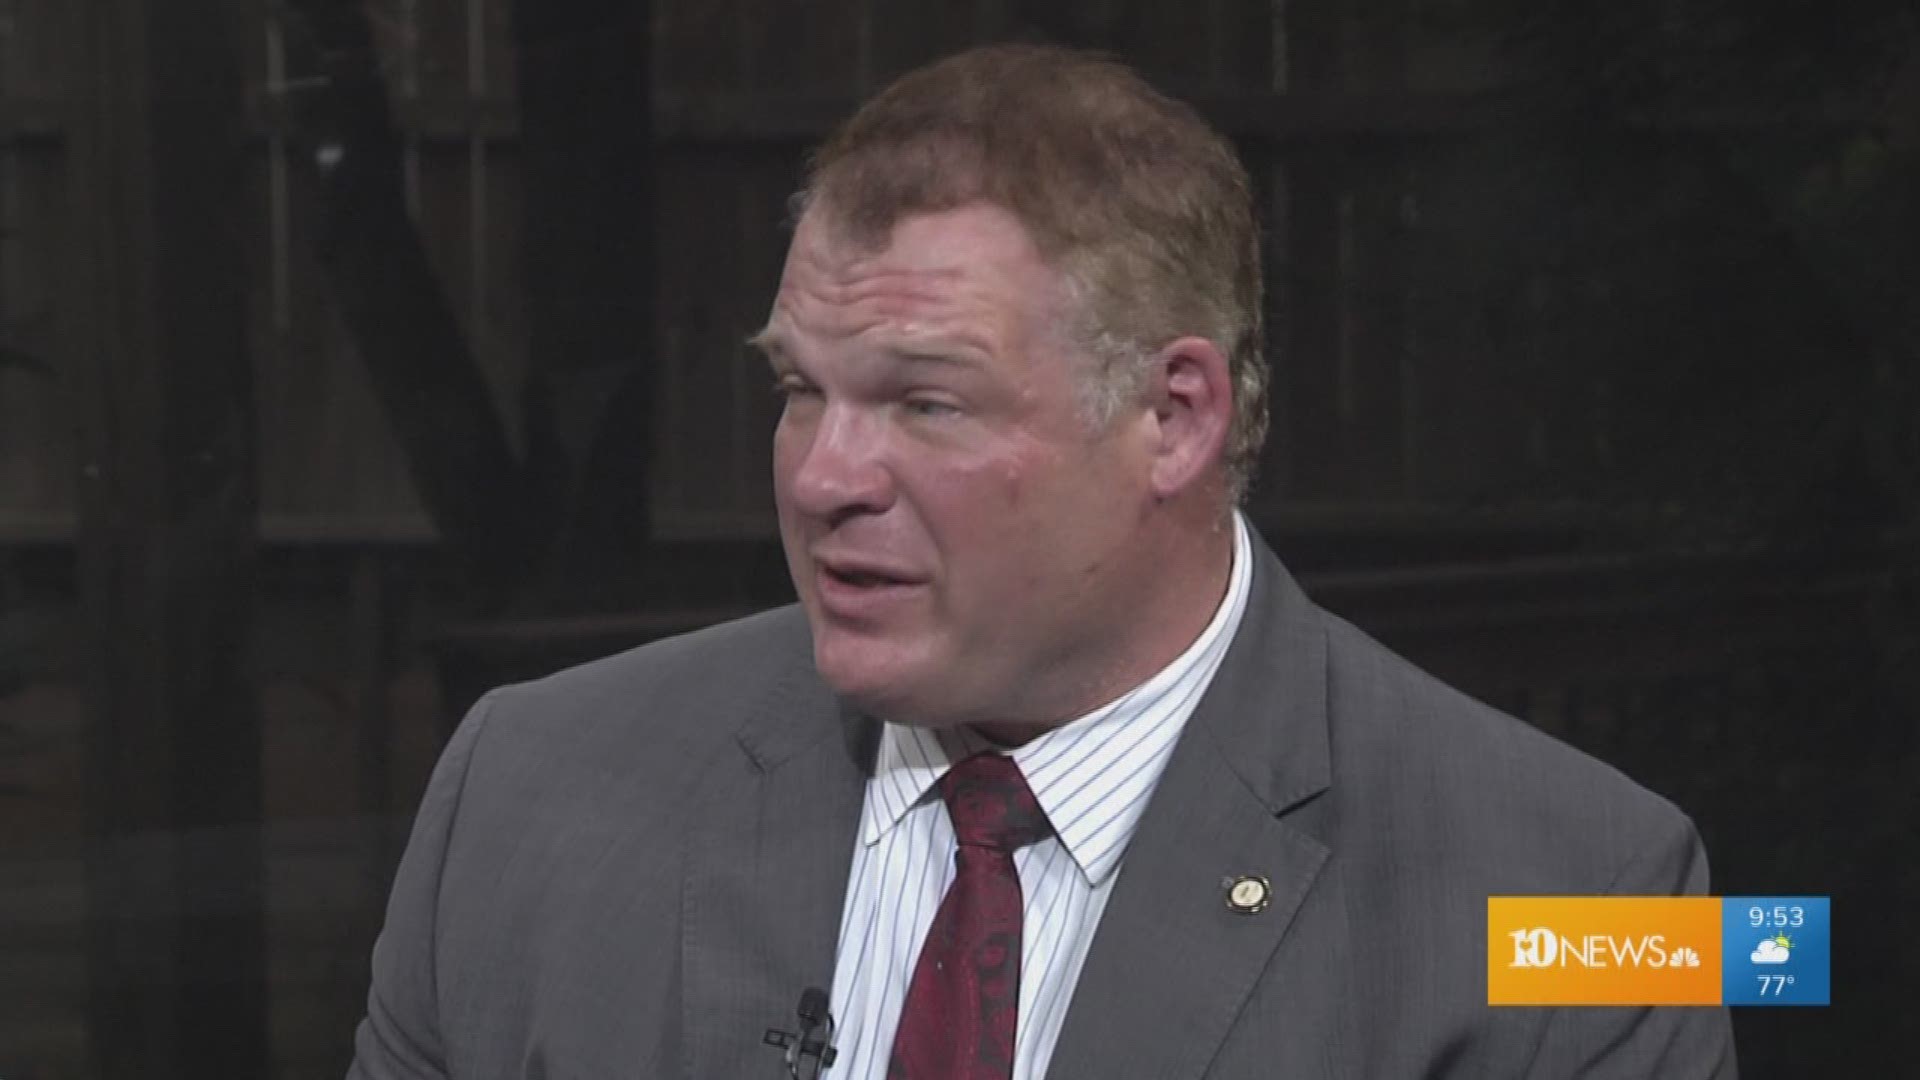 Knox County Health Department Director Dr. Martha Buchanan and Knox County Mayor Glenn Jacobs talk about efforts to combat drug abuse and an upcoming community event.